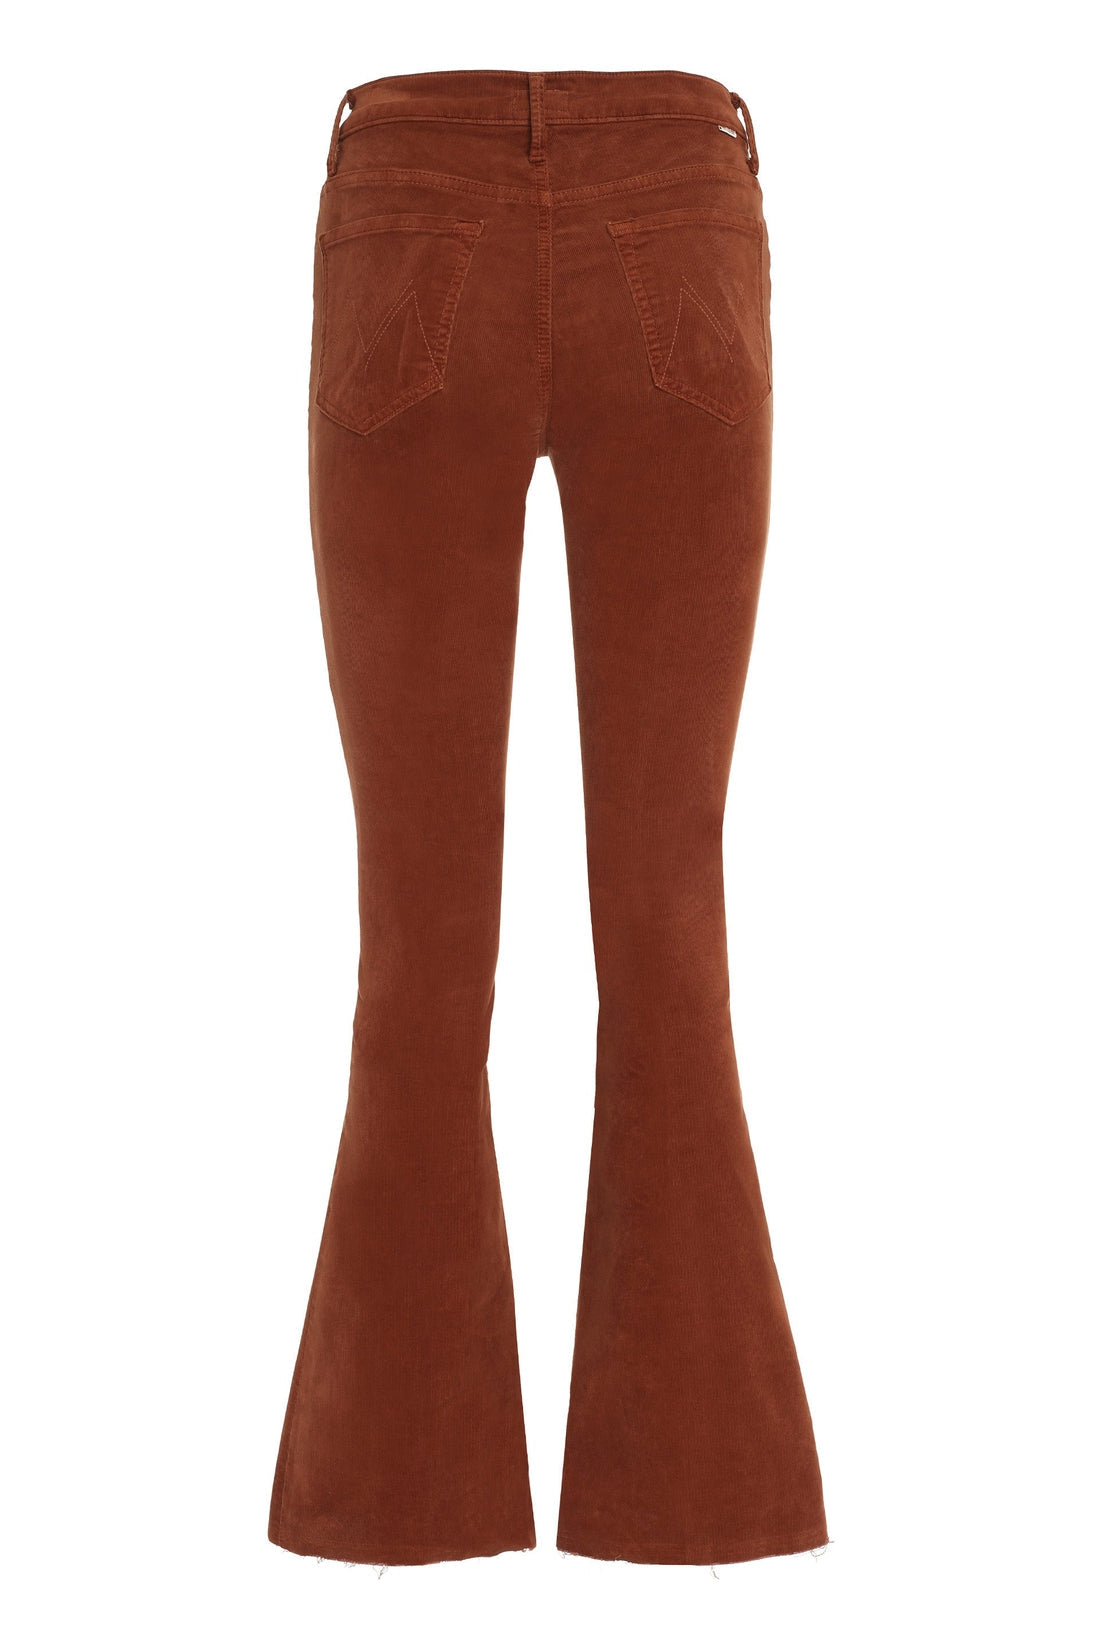 Mother-OUTLET-SALE-The Weekender Fray corduroy flared trousers-ARCHIVIST